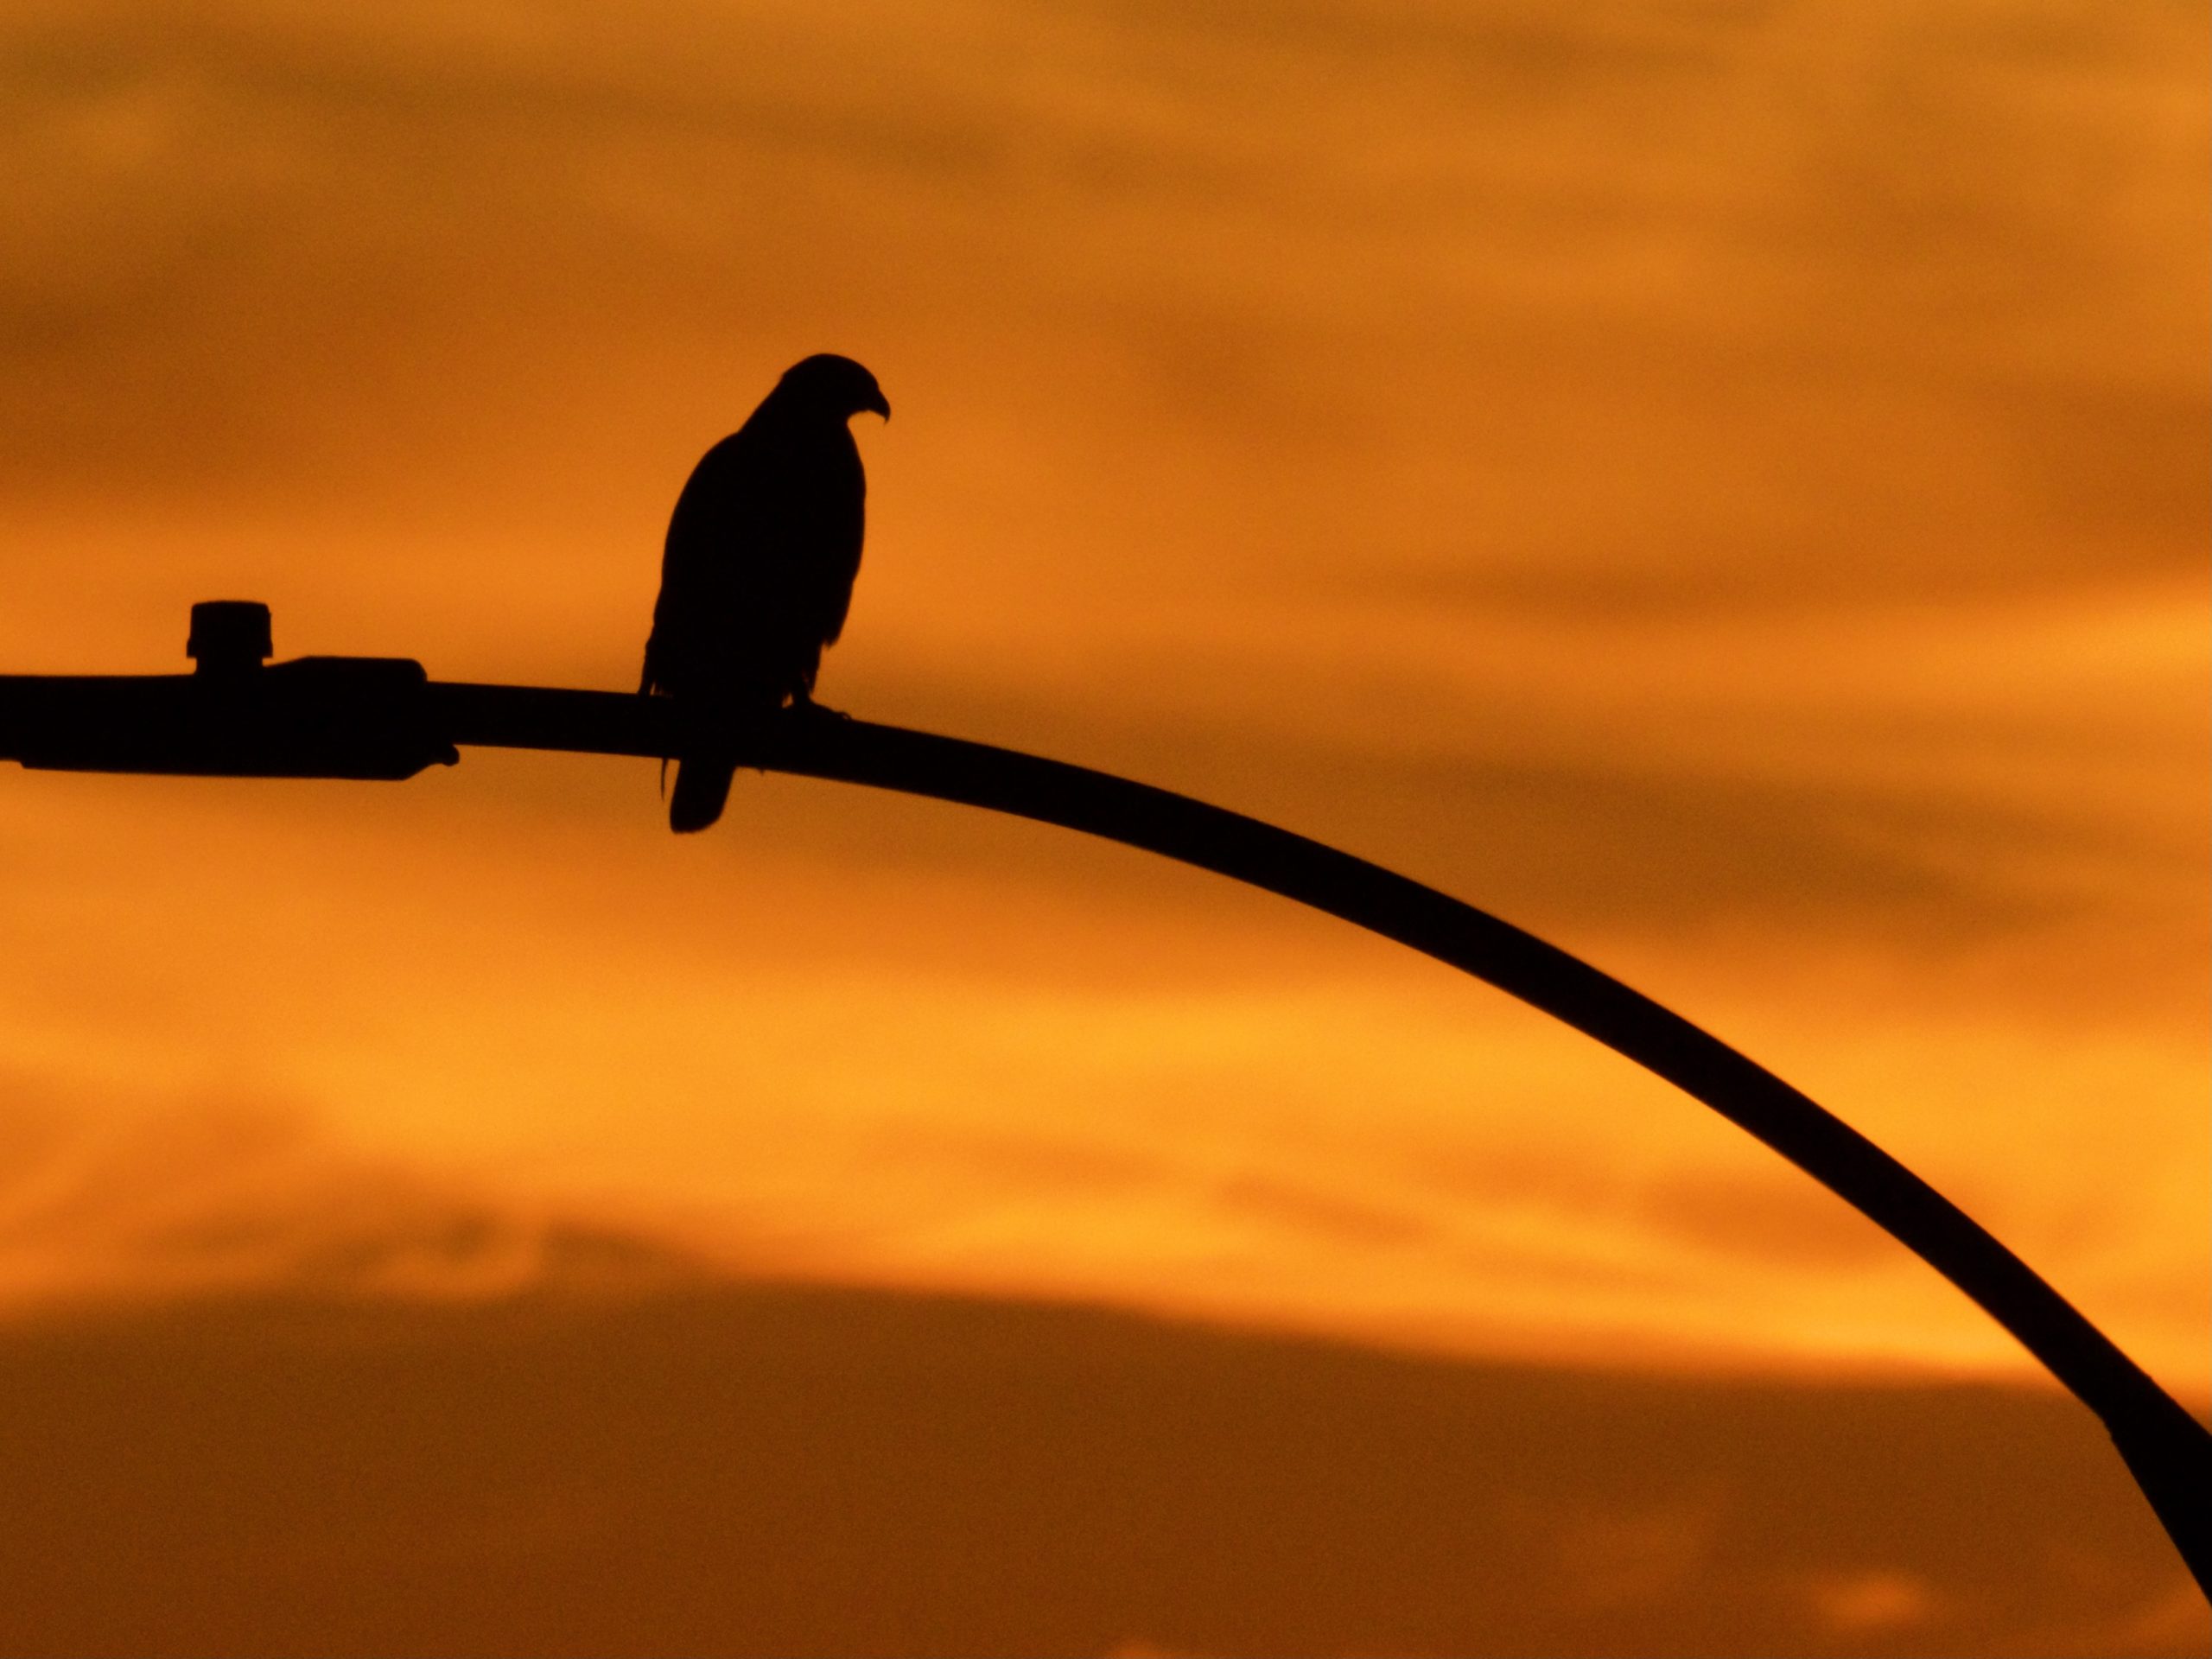 Red-Tailed Hawk in Silhouette at Sunset